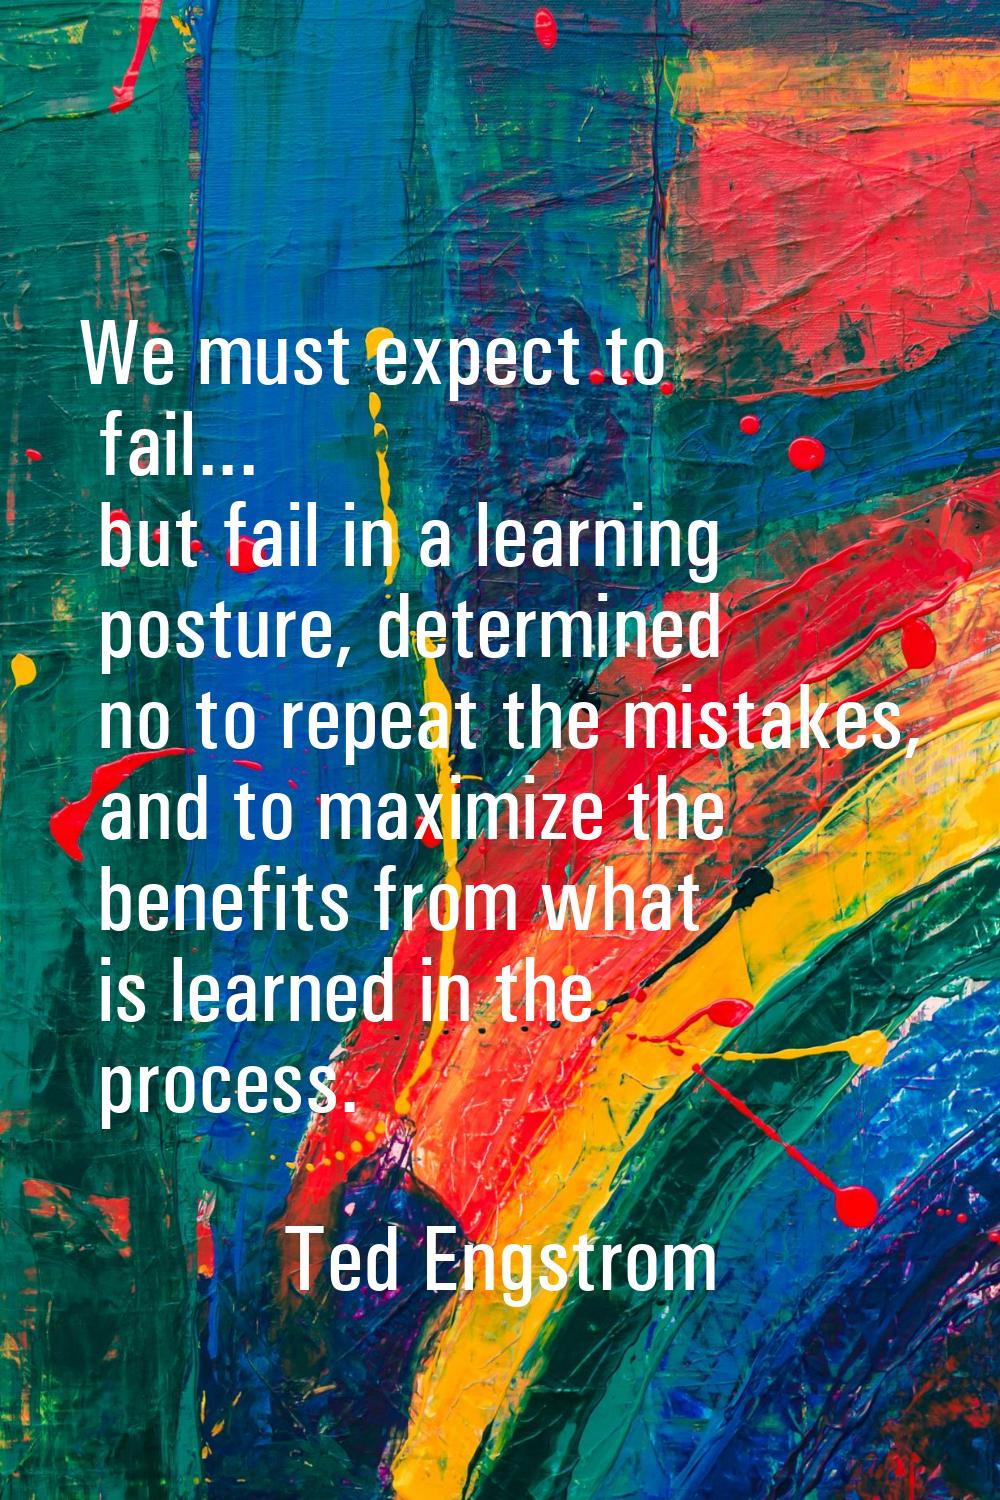 We must expect to fail... but fail in a learning posture, determined no to repeat the mistakes, and